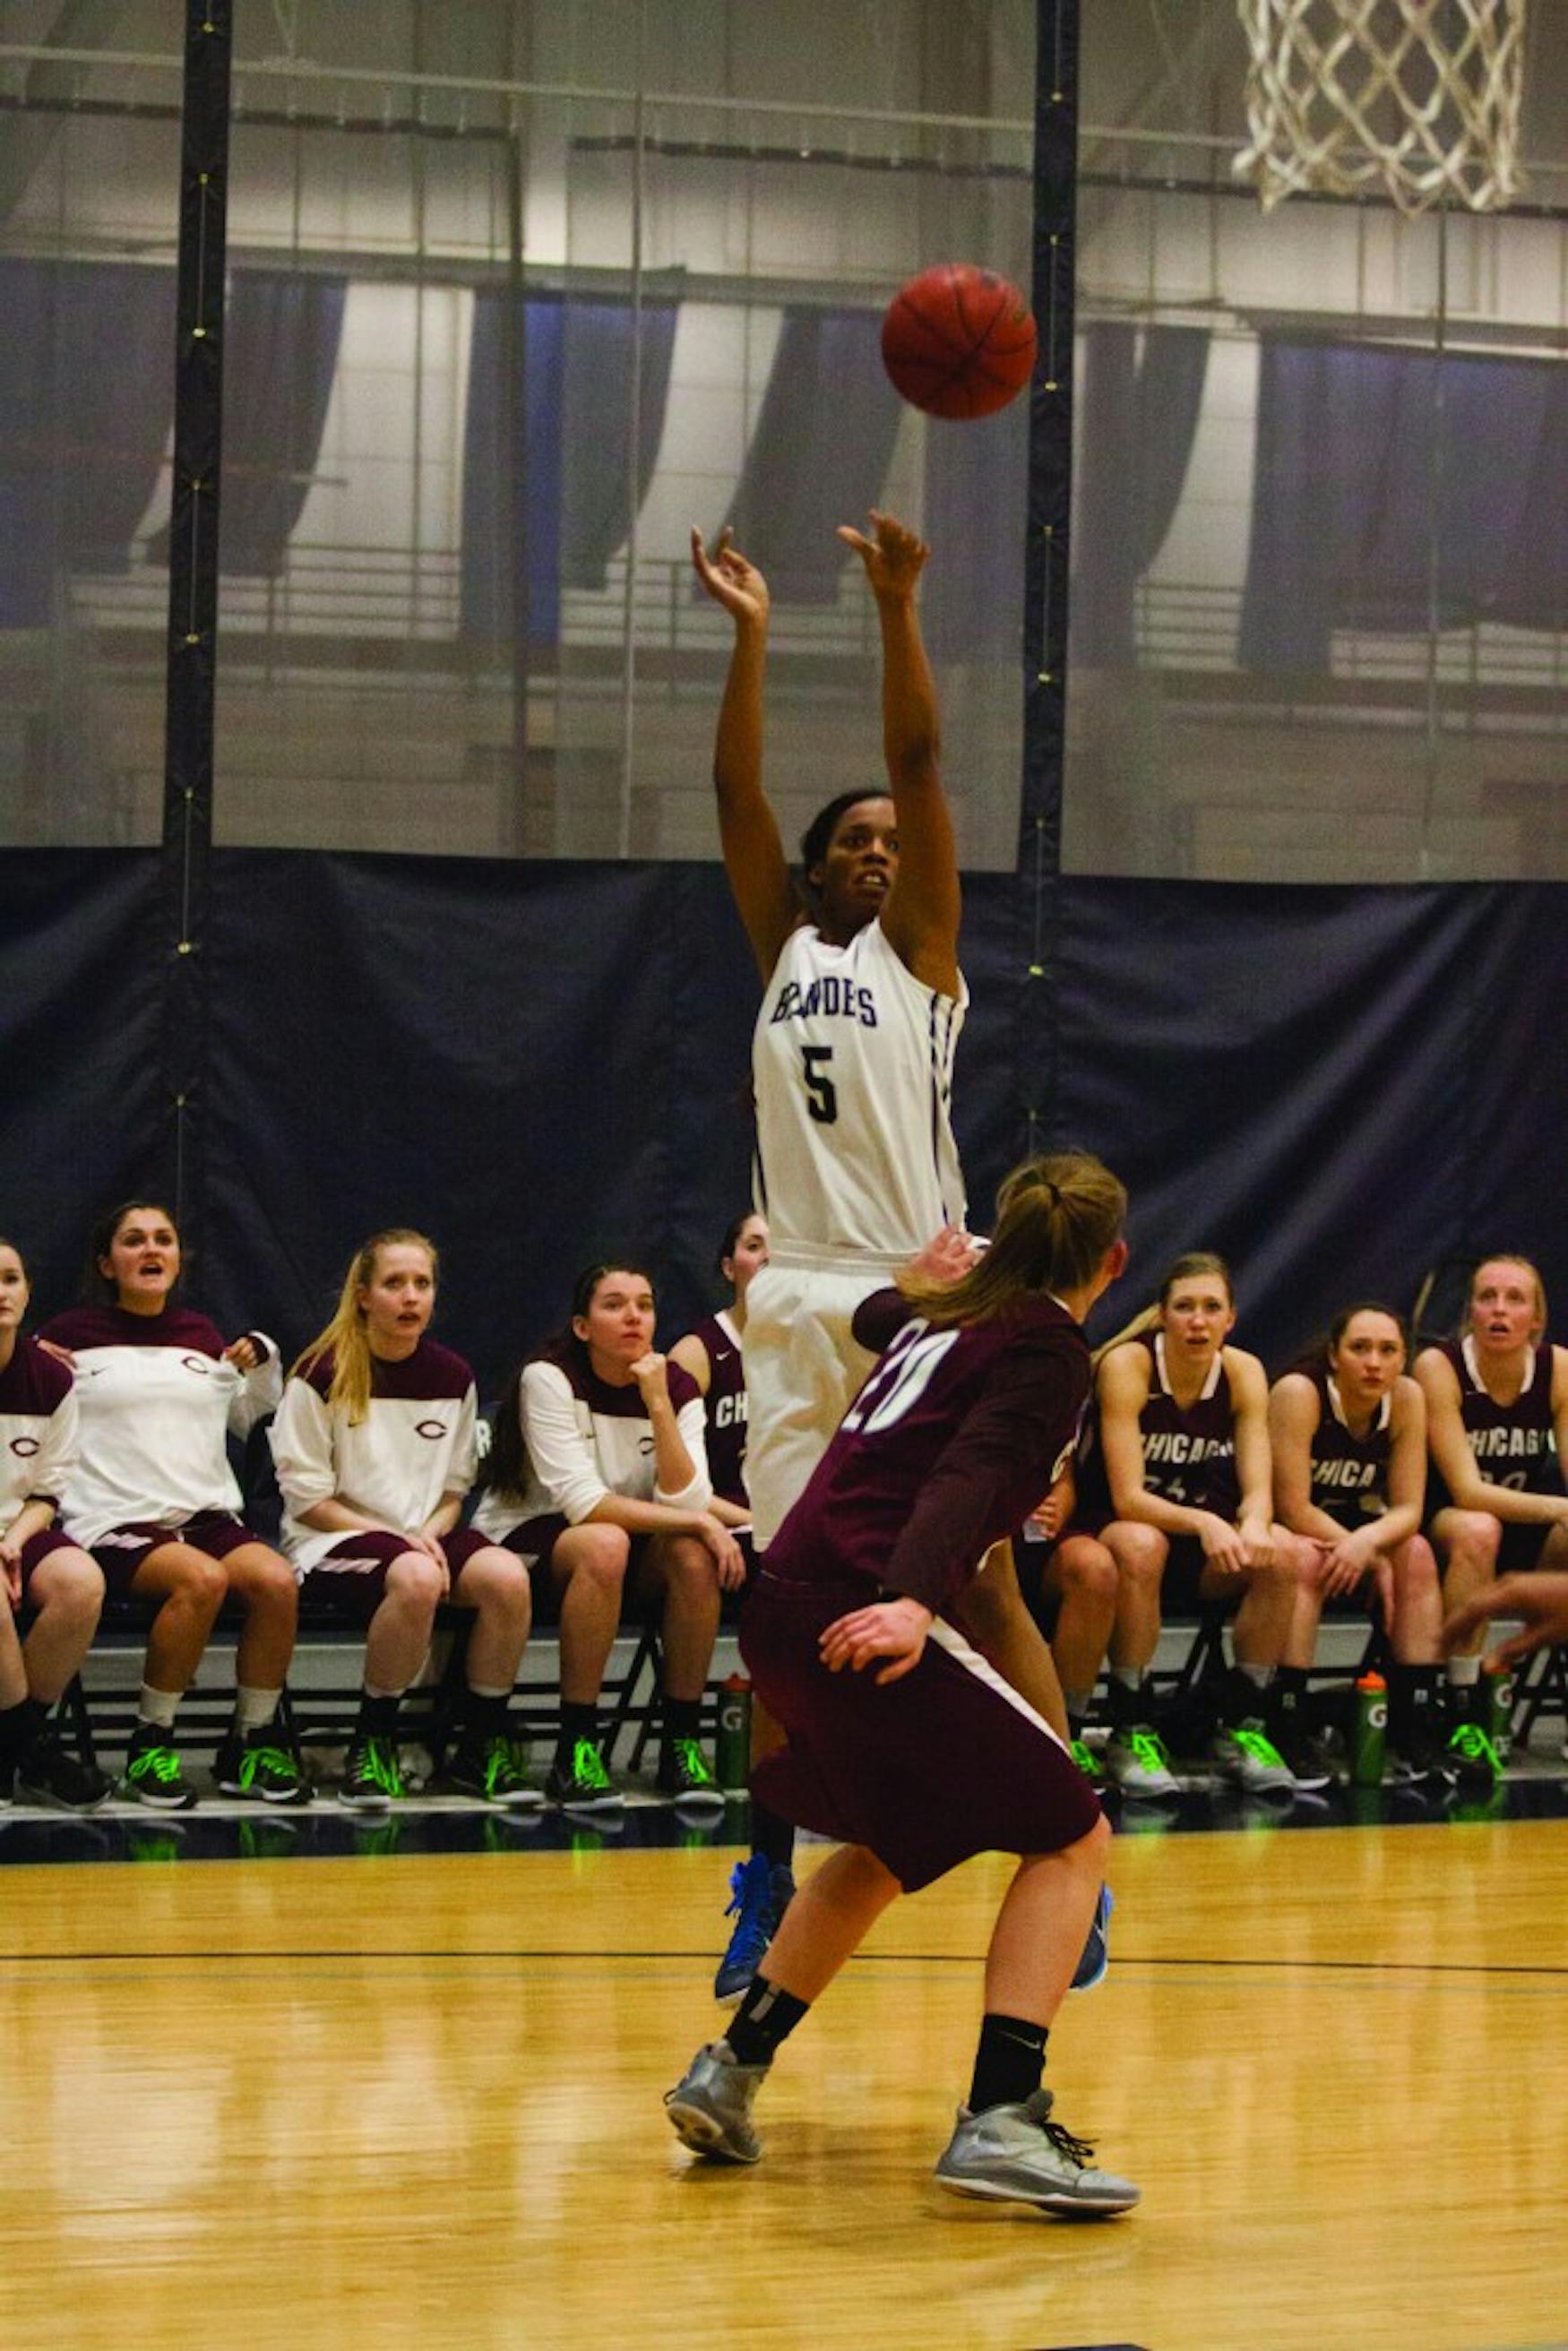 FOLLOW THROUGH: Forward Tori Dobson ’16 takes a jump shot during the team’s loss to the University of Chicago this past Friday.